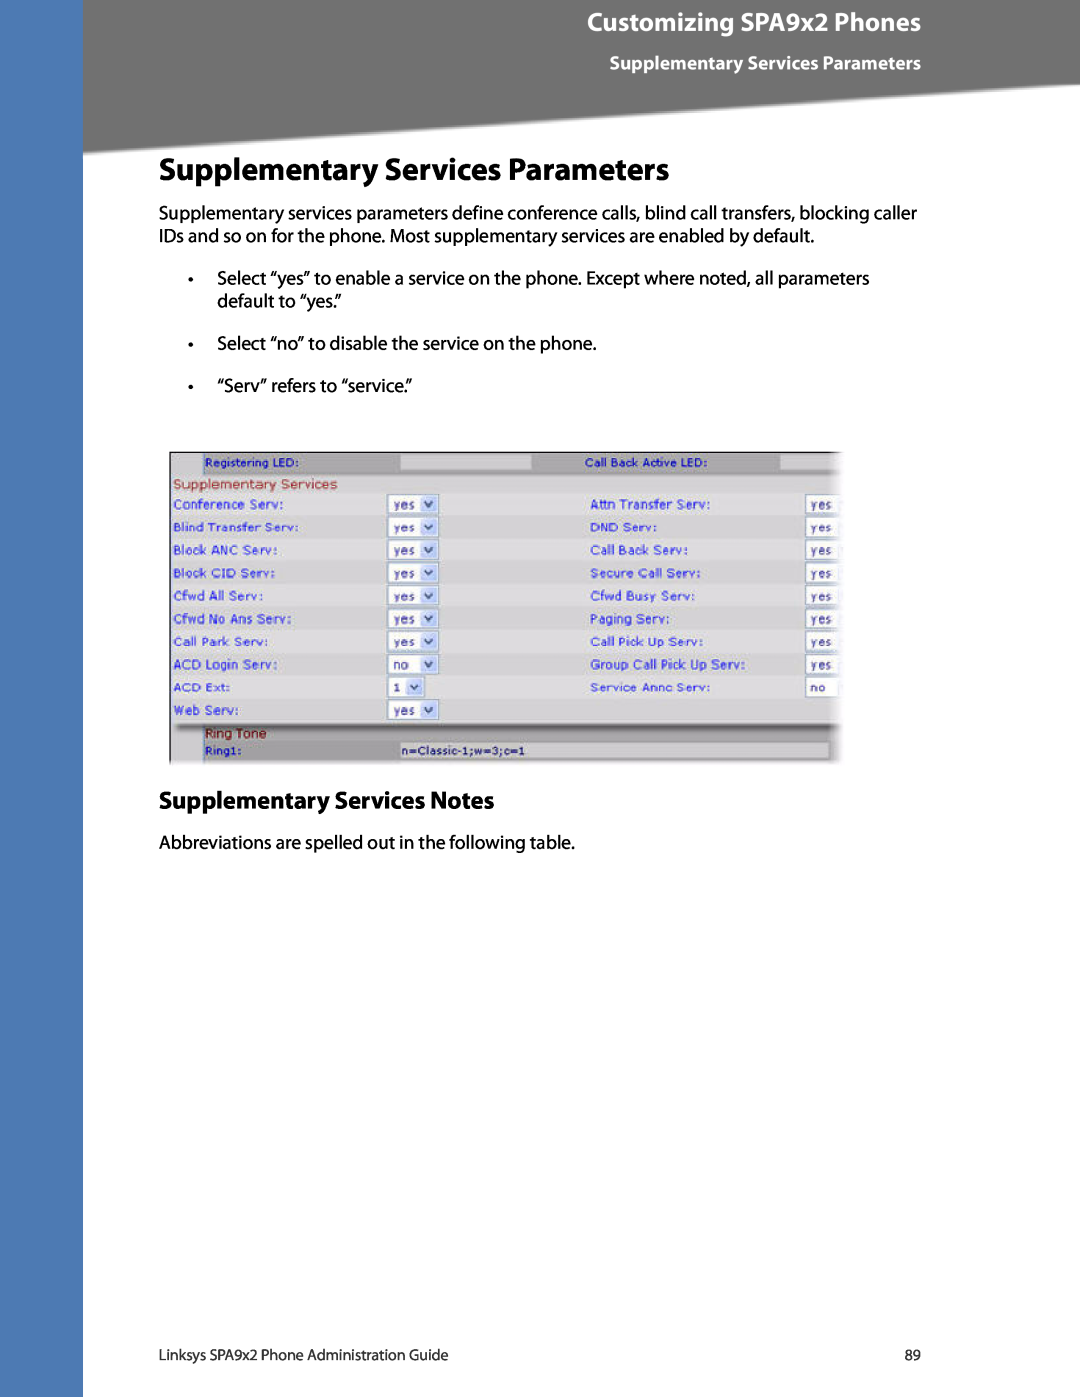 Linksys SPA962, SPA942, SPA932 Supplementary Services Parameters, Supplementary Services Notes, Customizing SPA9x2 Phones 